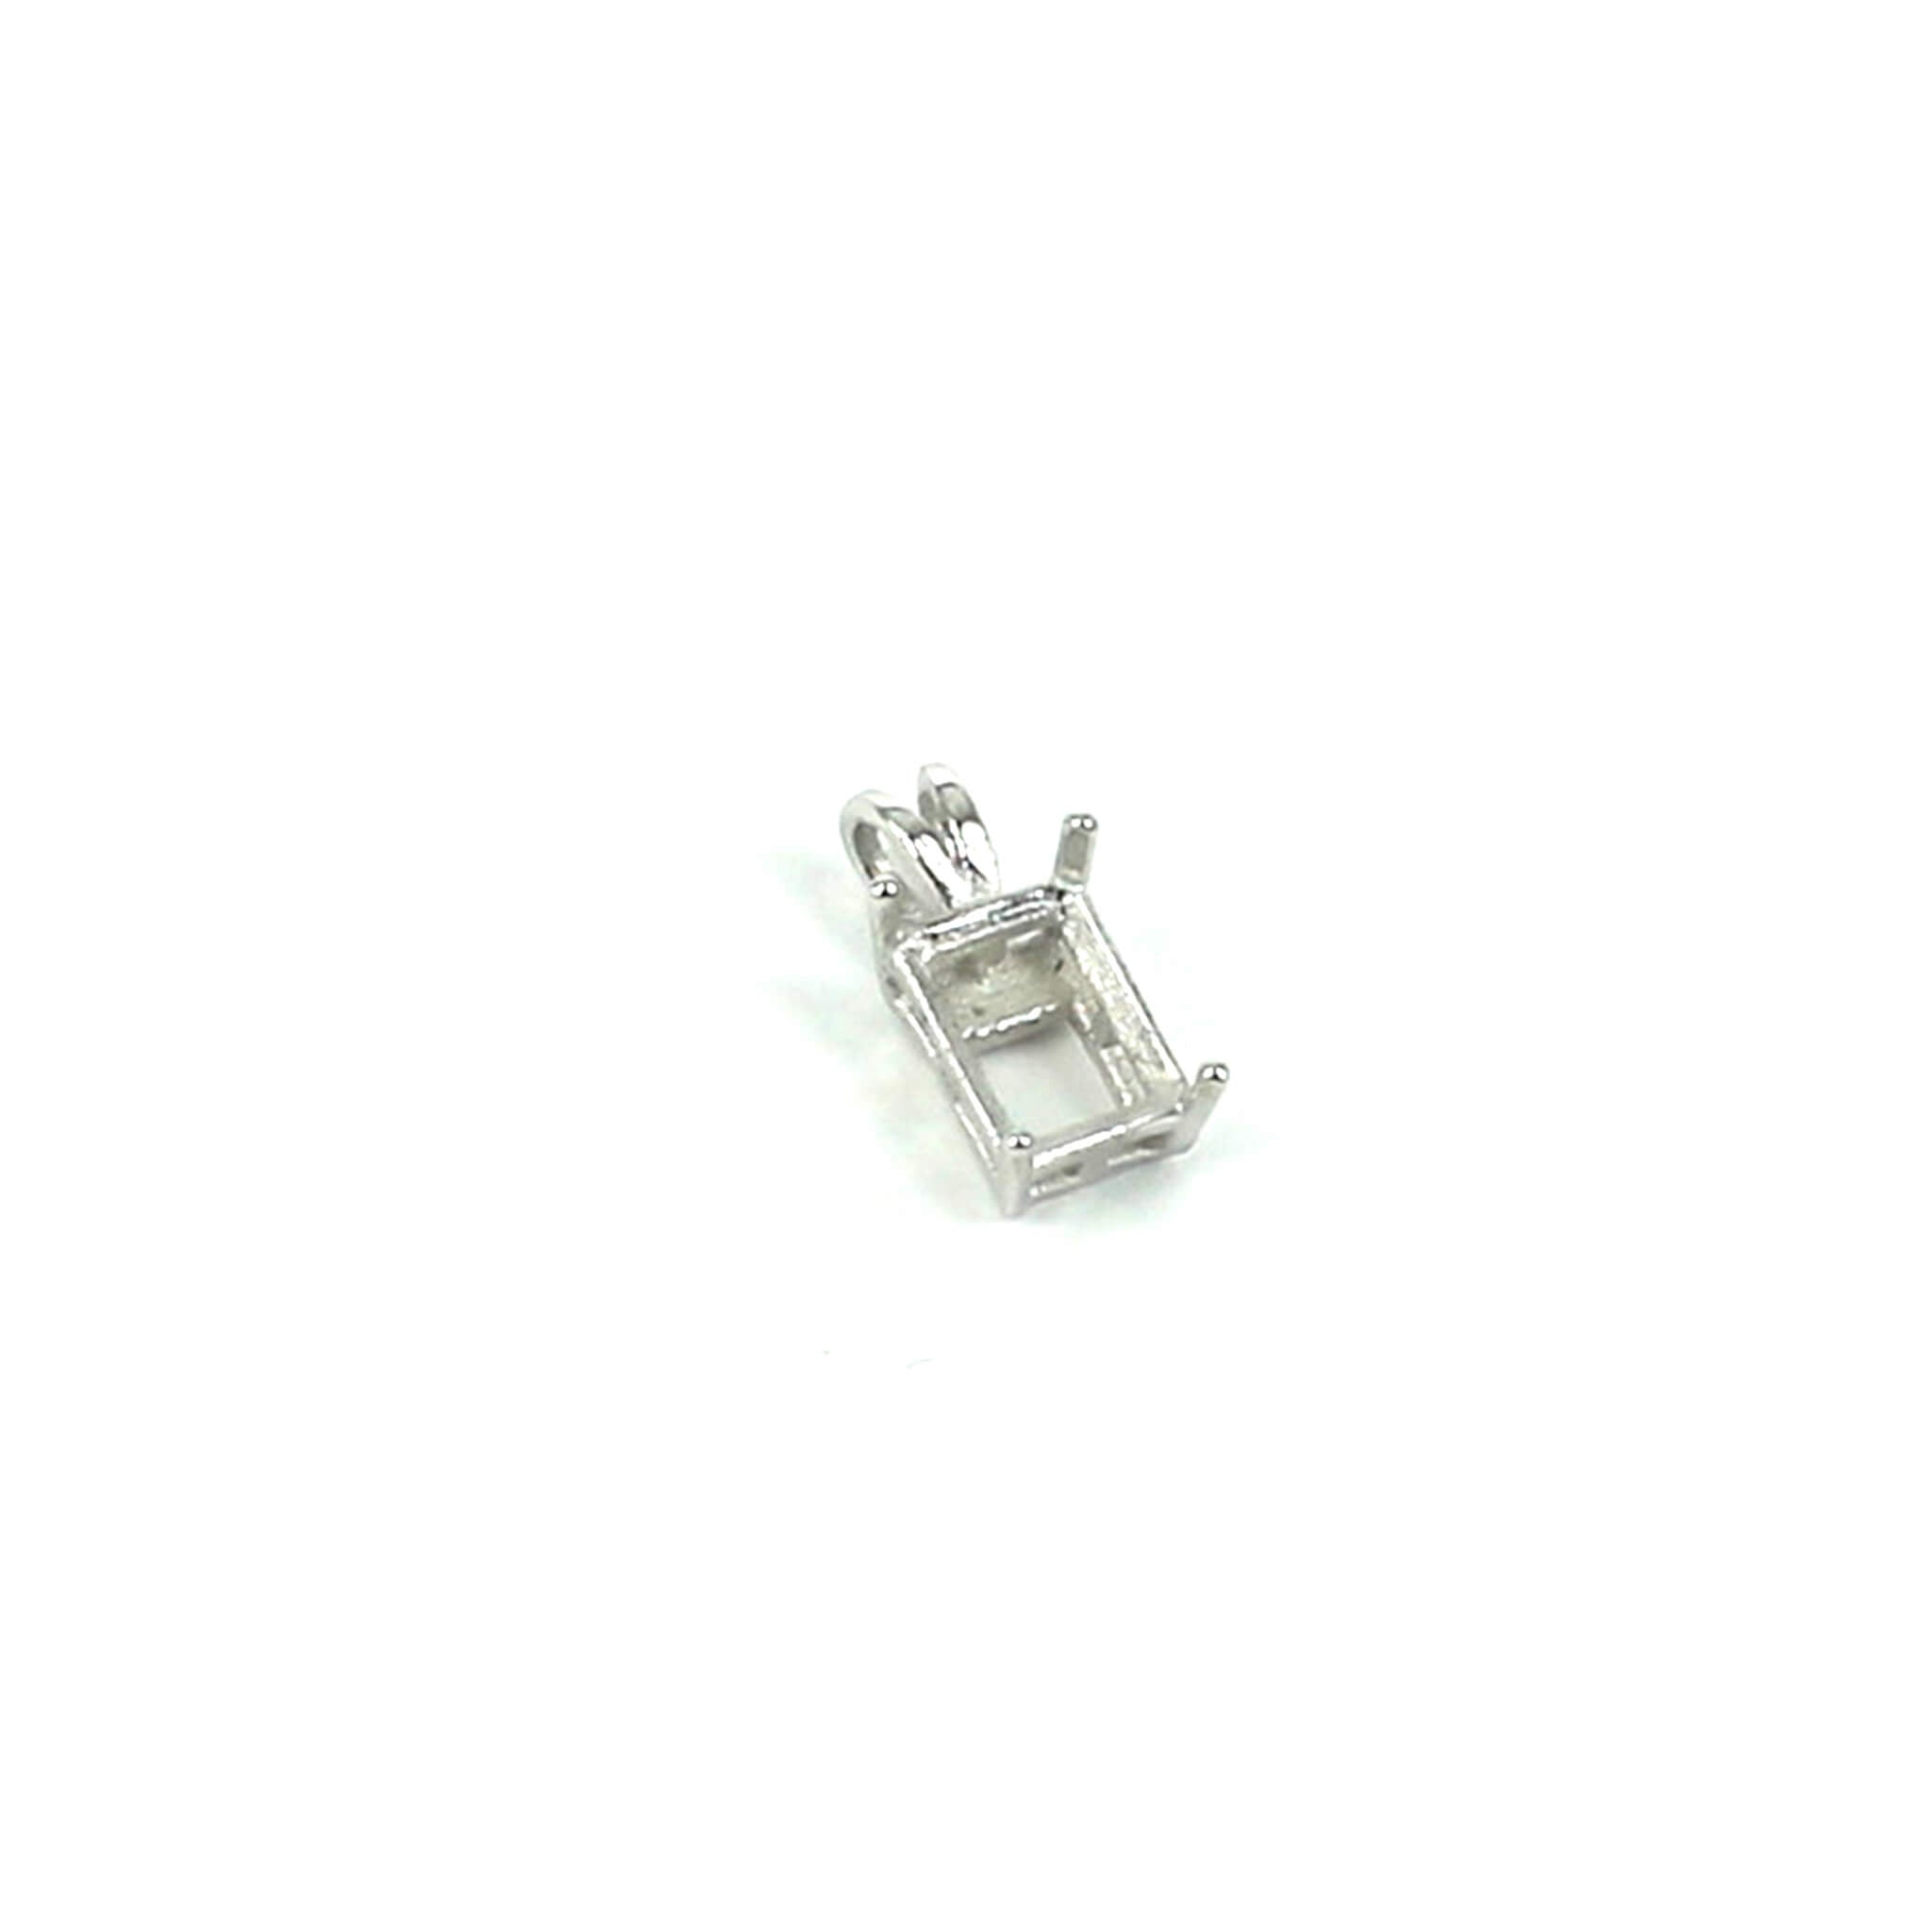 Basket Pendant with Deep Rectangular Mounting in Sterling Silver